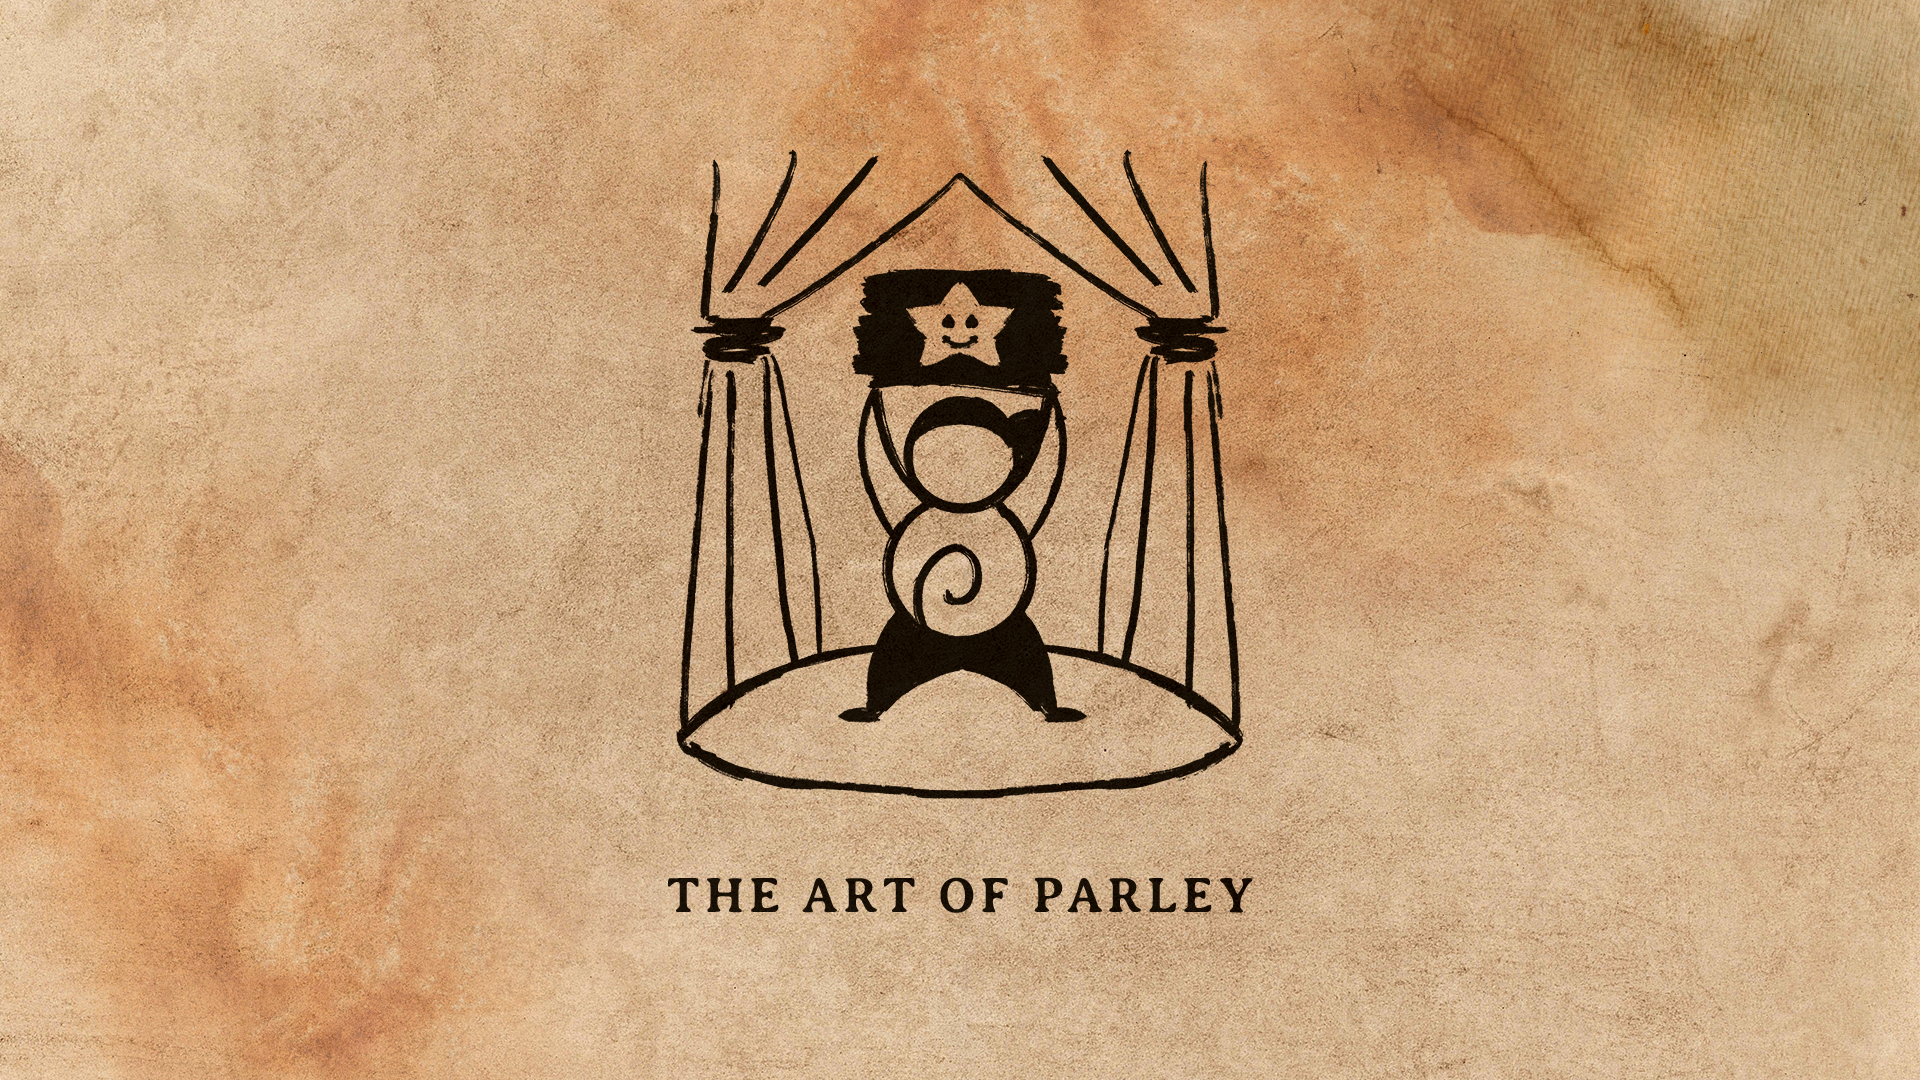 The Art of Parley